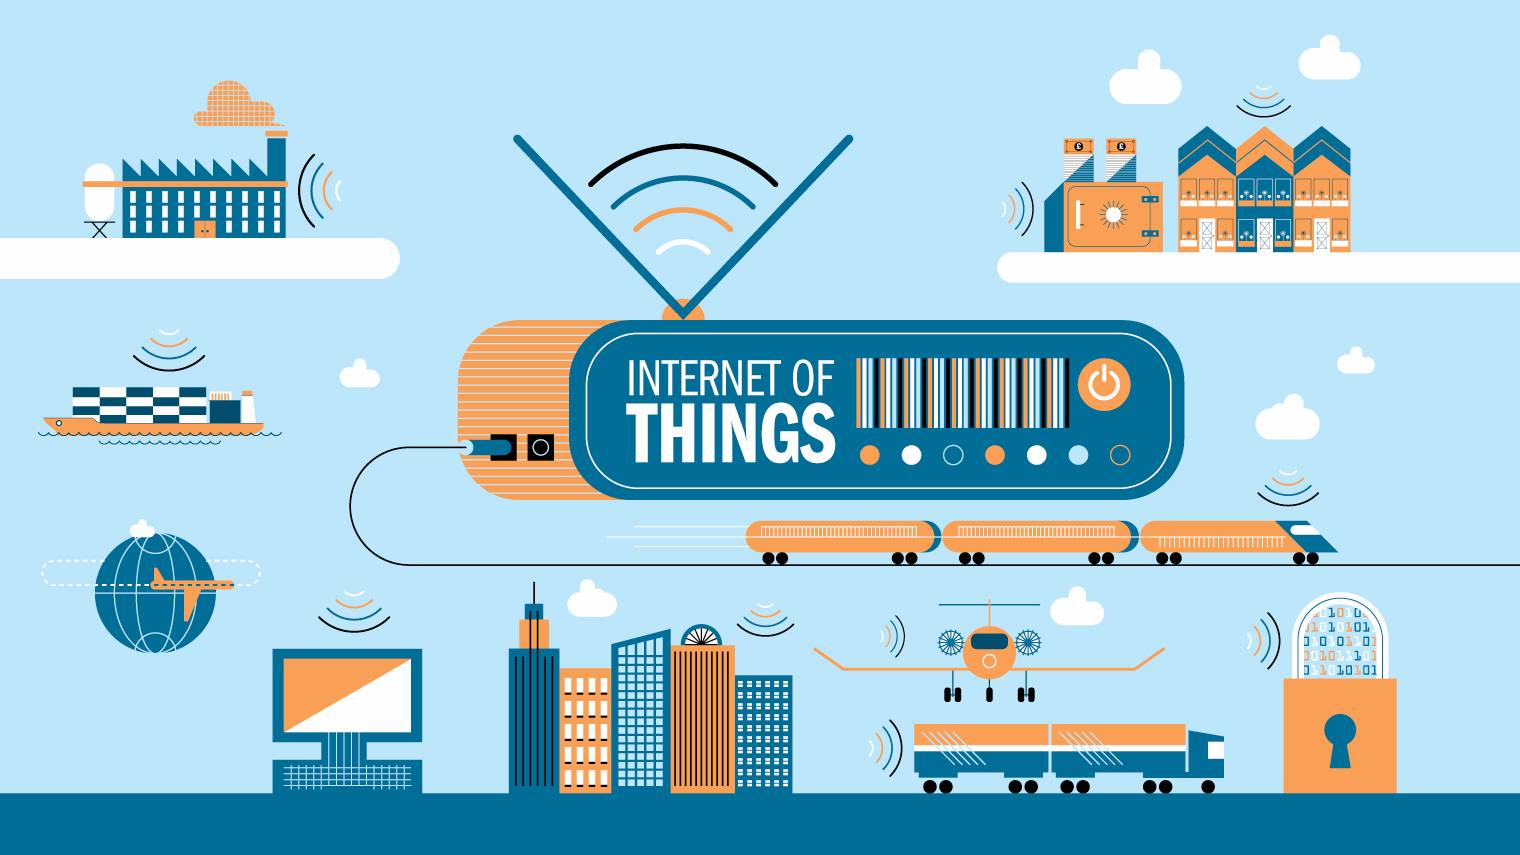 Internet of Things devices, Internet of Things technology, IOT technology